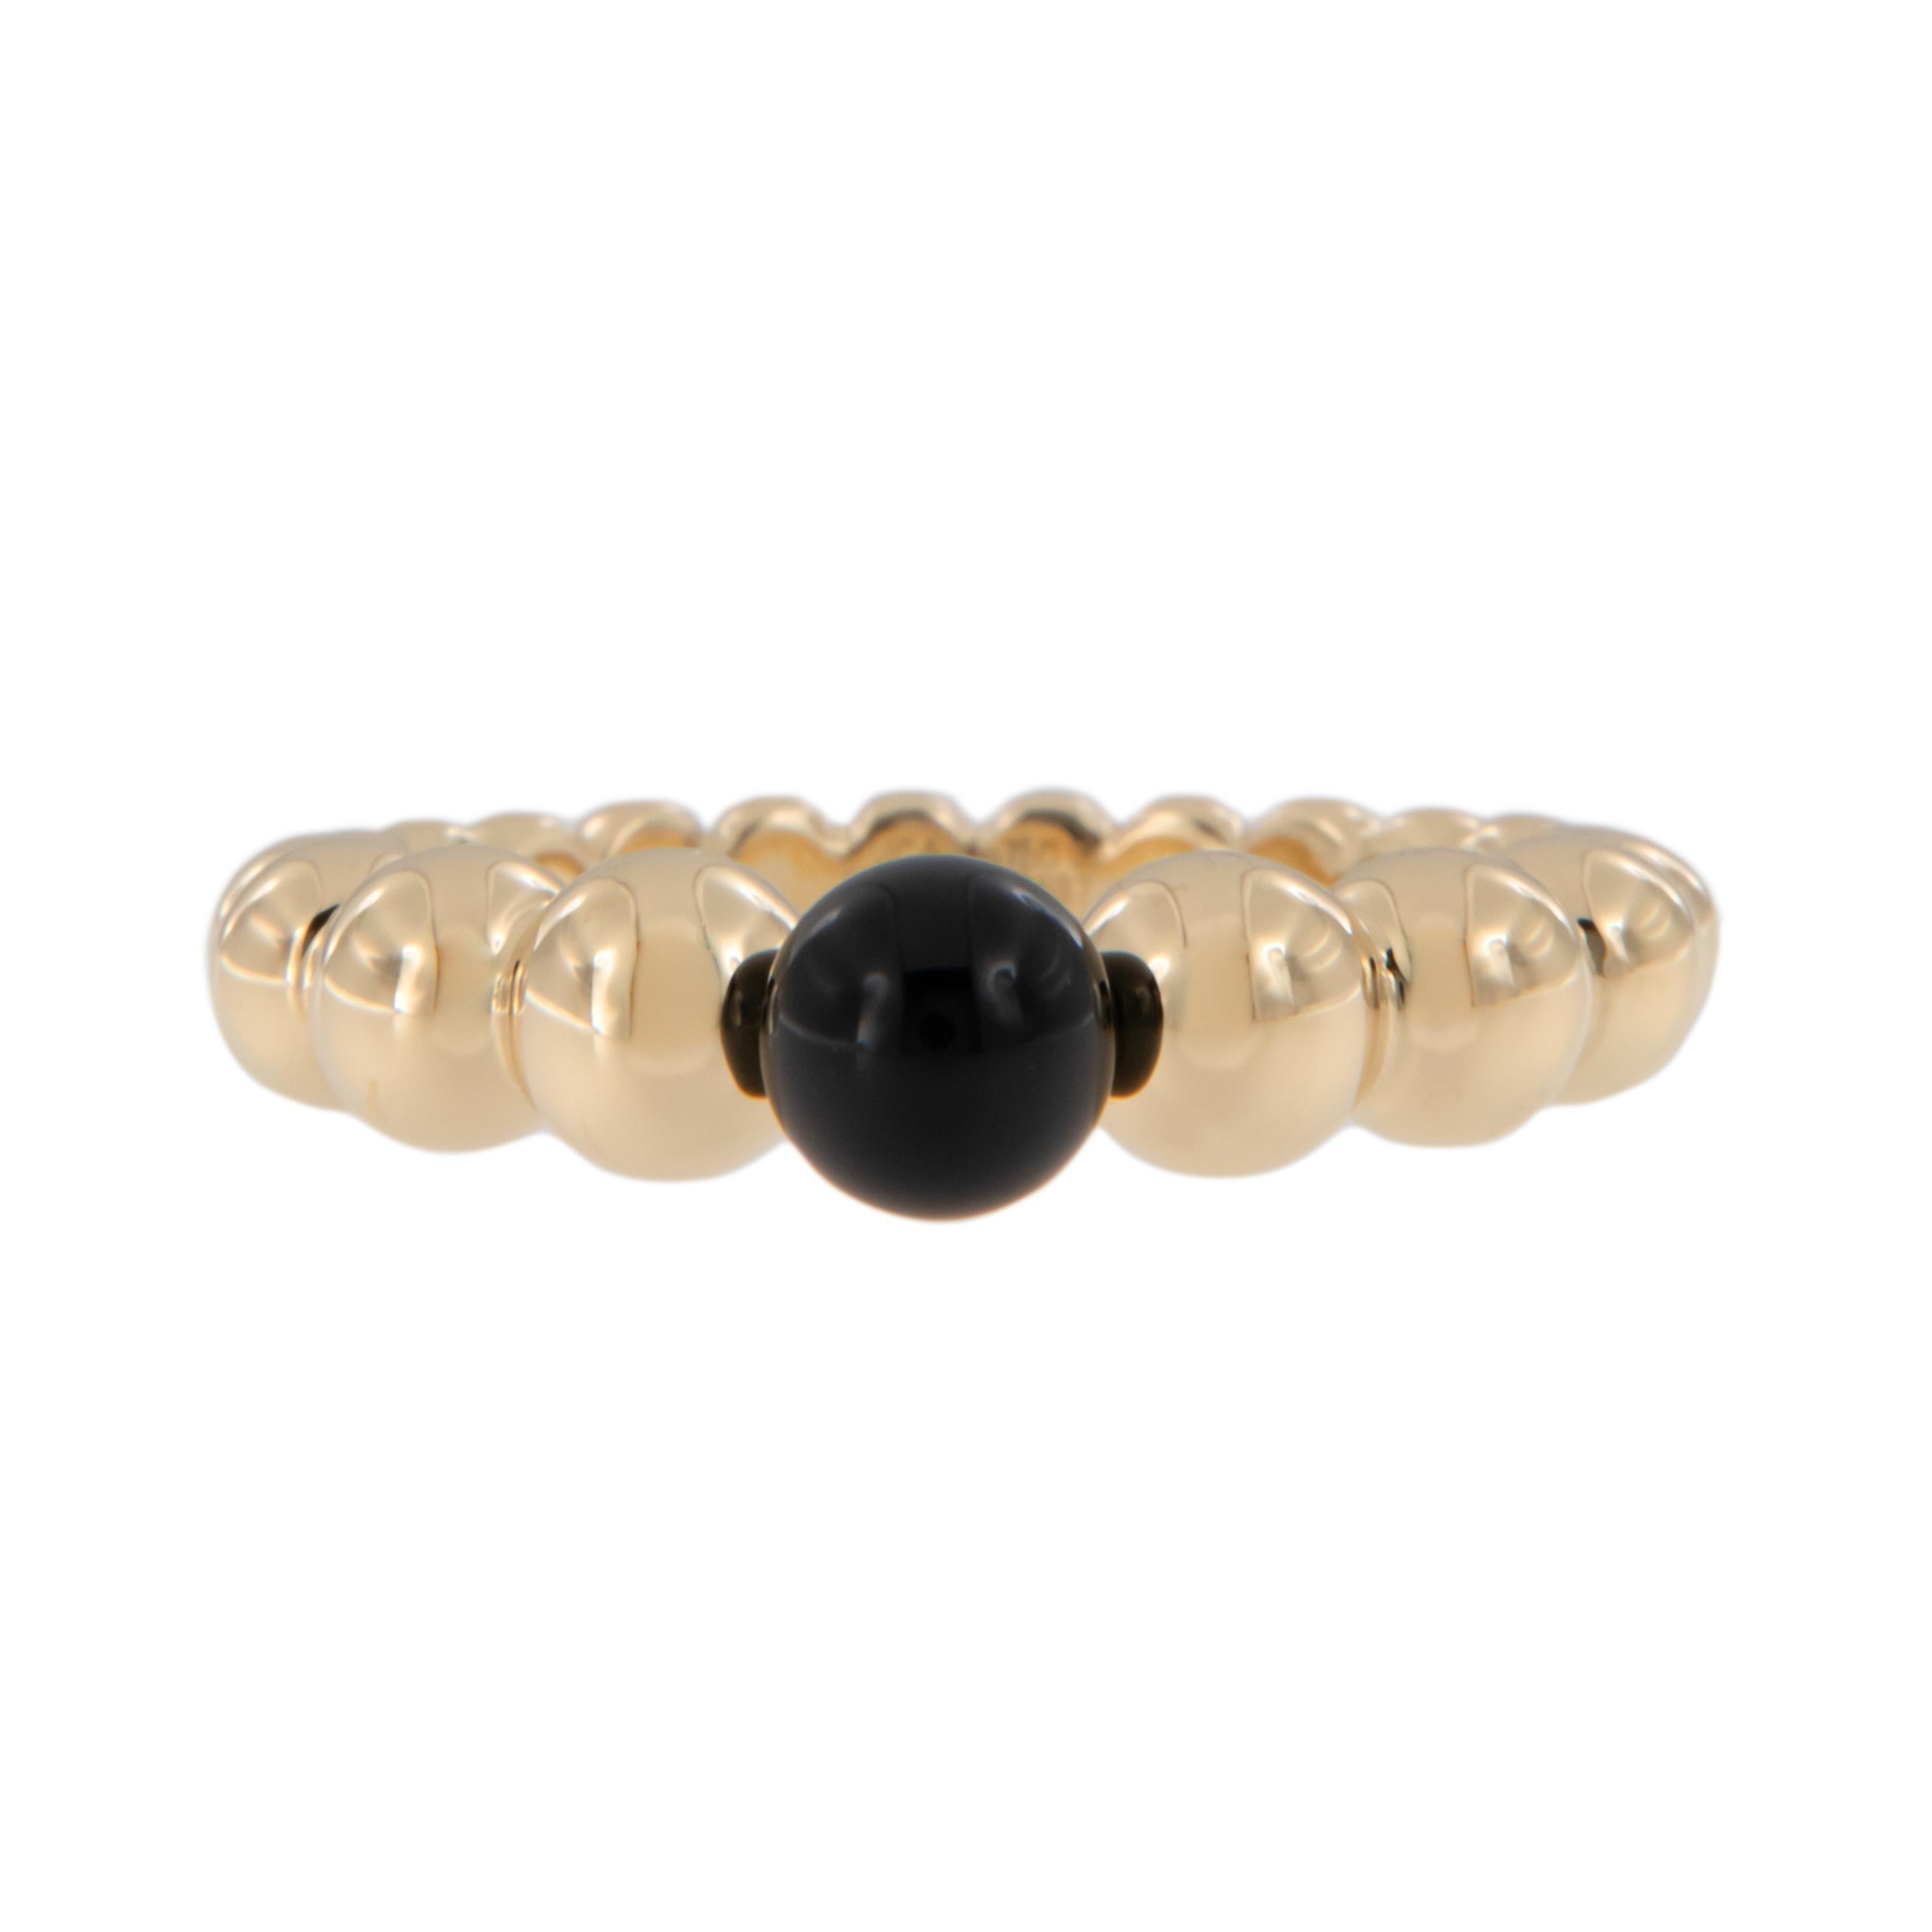 The curved lines of the 18 karat yellow gold beaded ring symbolizes pearls of gold. This lovely ring accentuates a superb center black onyx bead ( 5.3mm) for a dramatic look yet being black it goes with everything. Made in a size 6.5 but can be